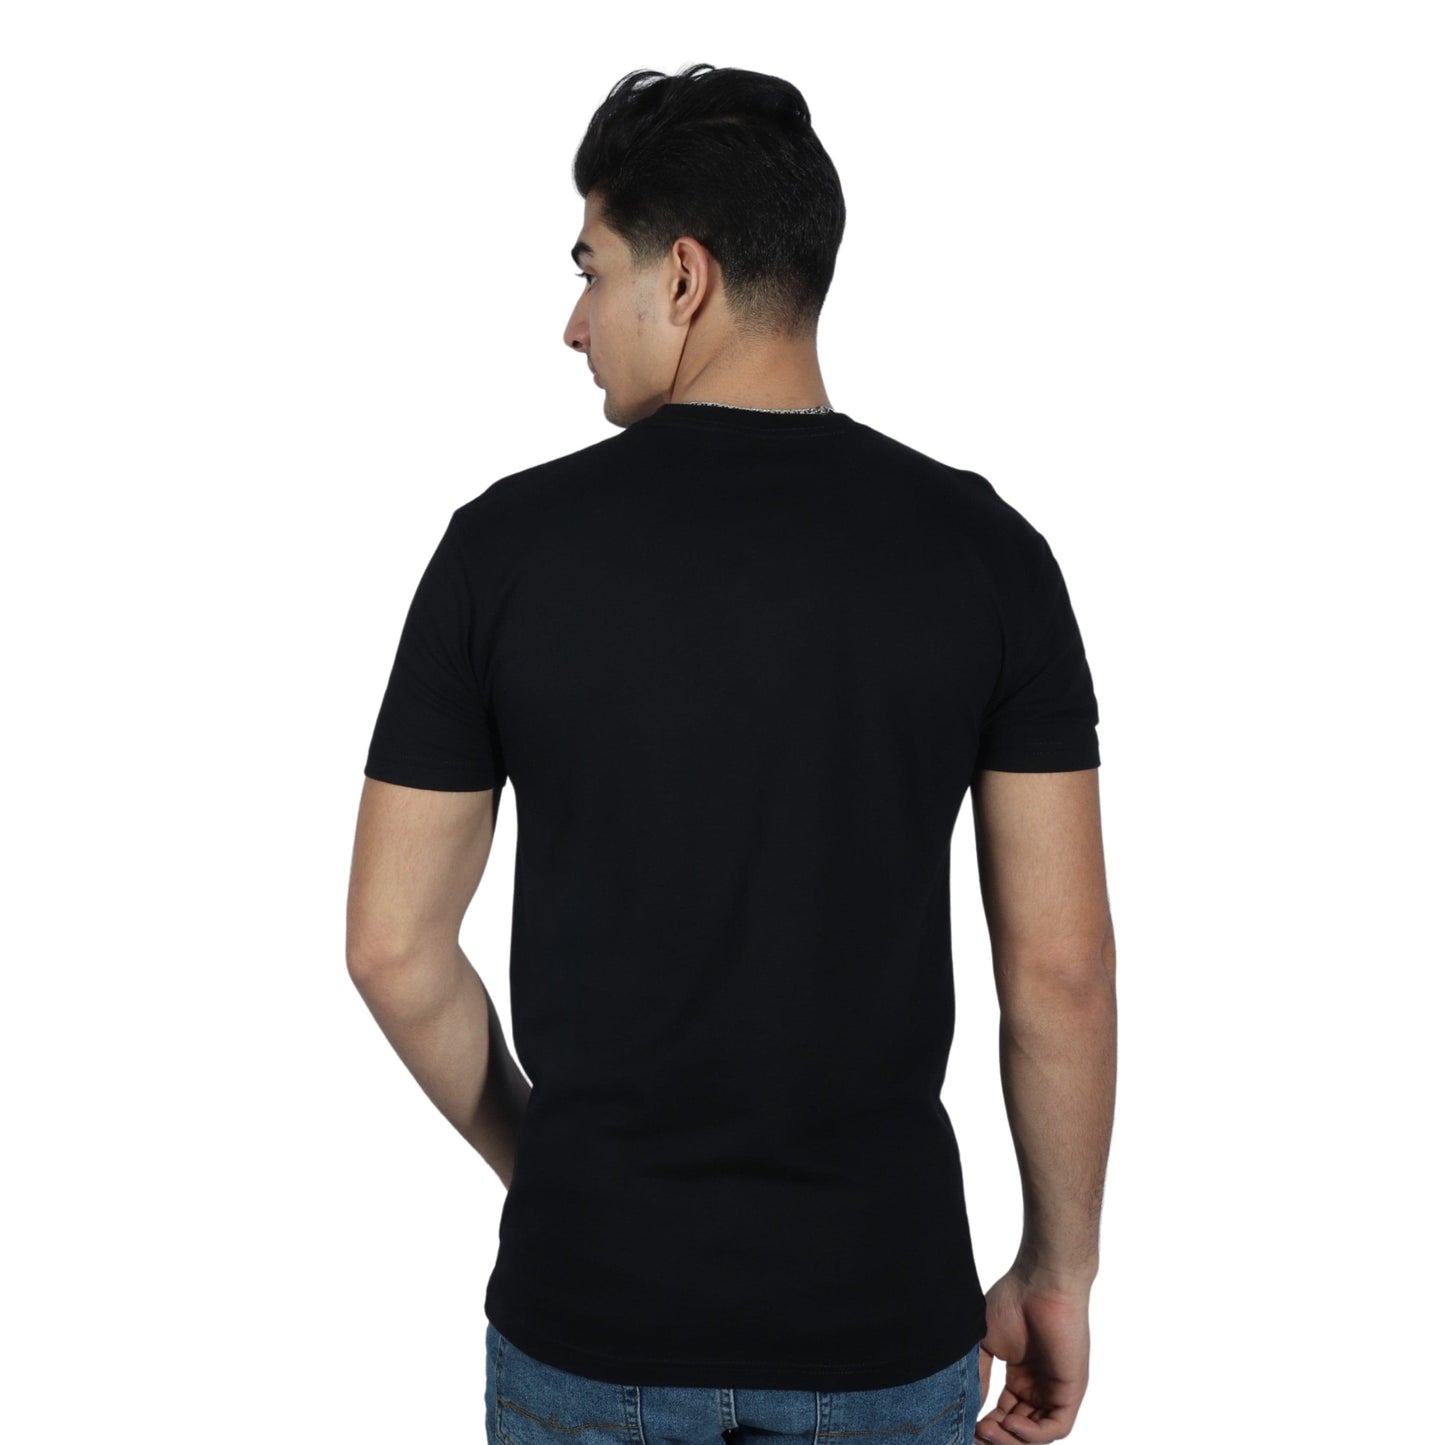 NEXT LEVEL Mens Tops S / Black NEXT LEVEL - Music Everything Printed T-shirt